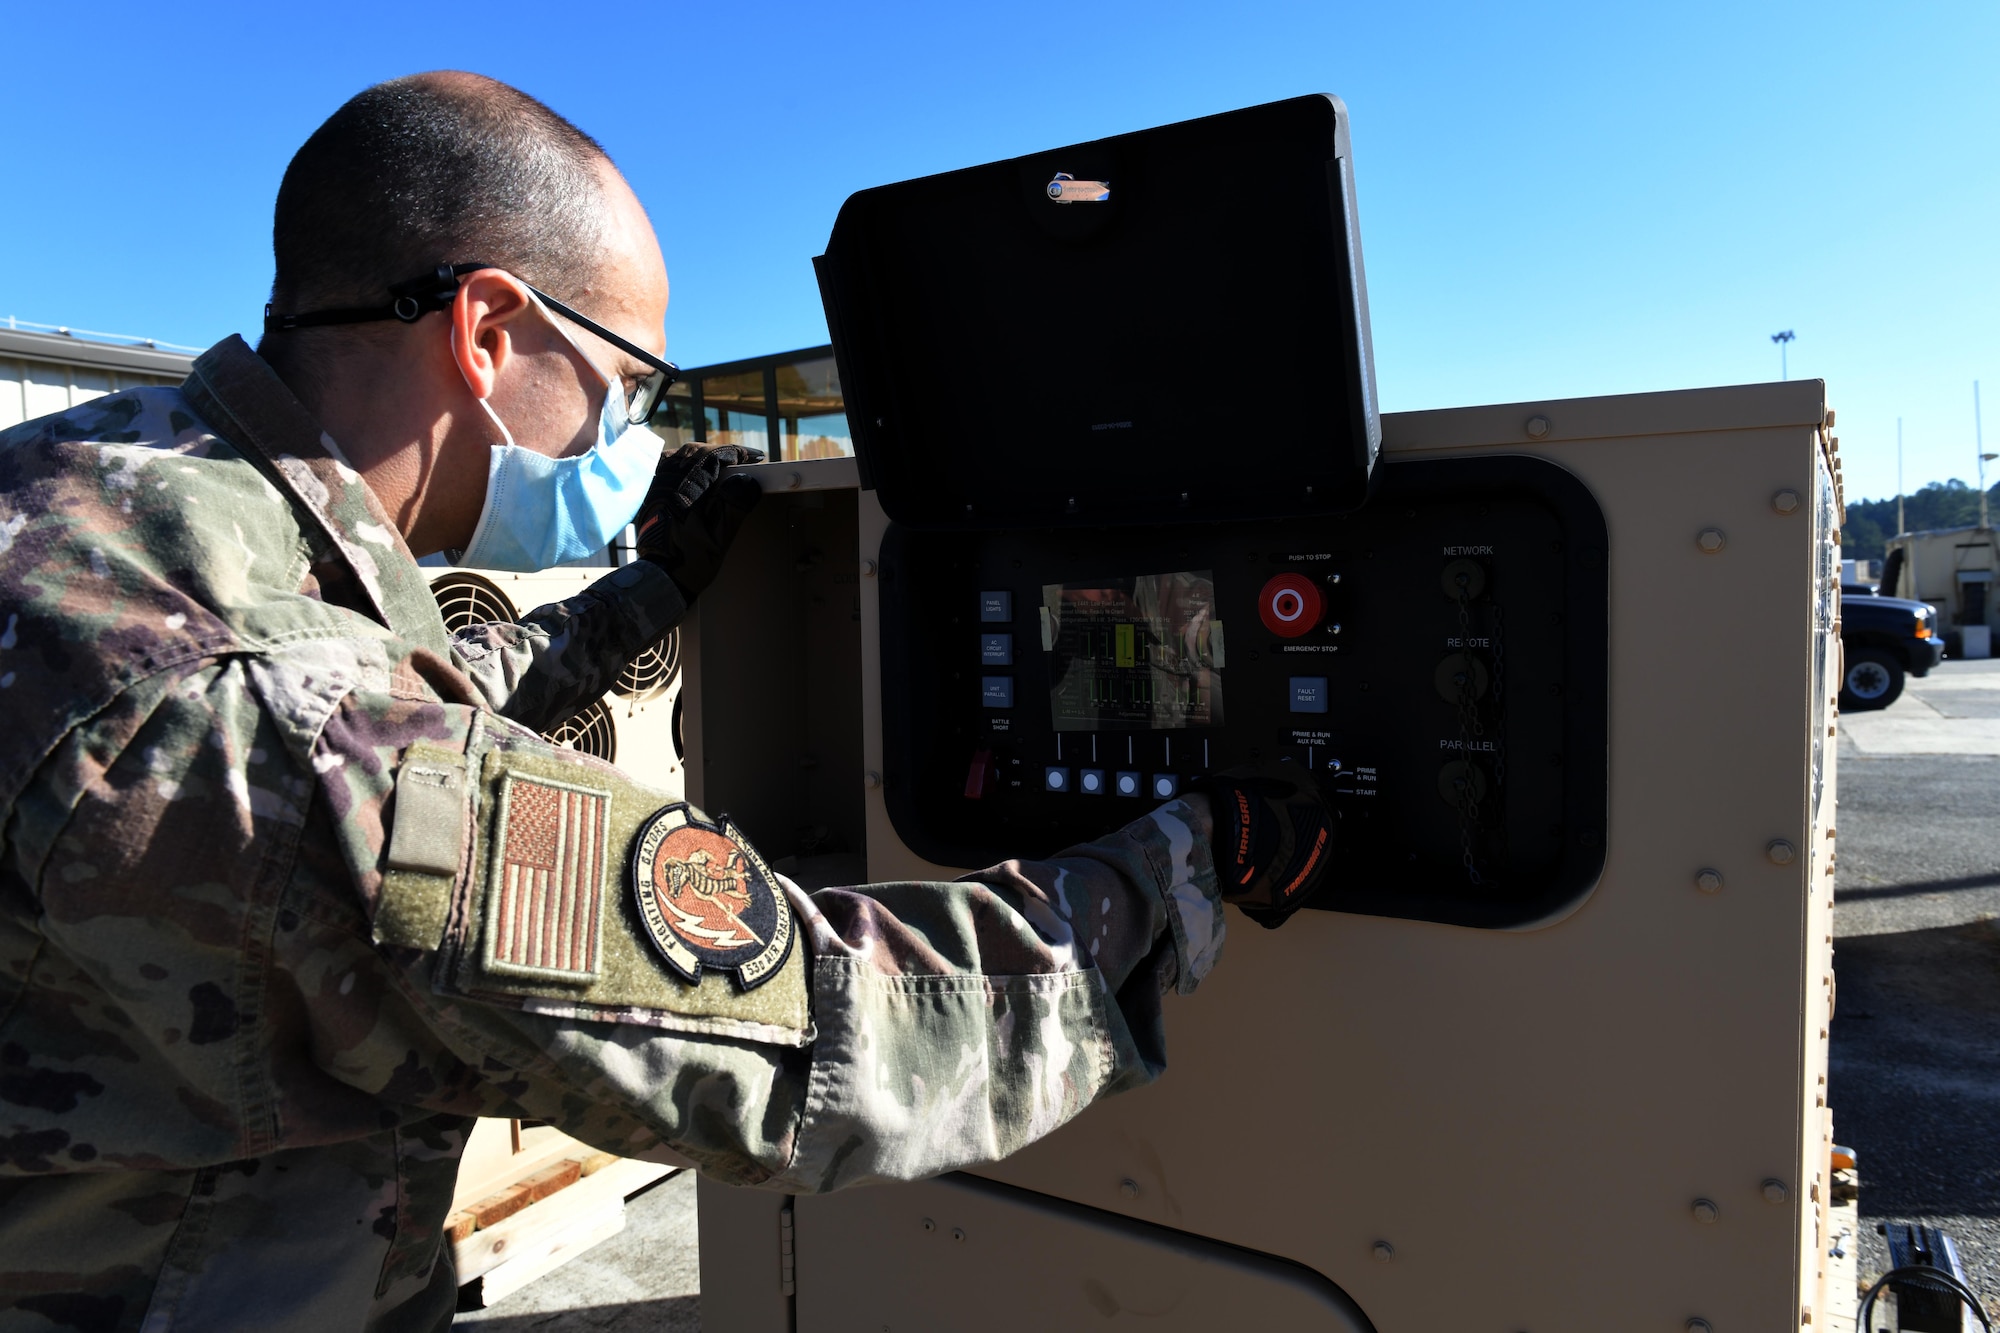 Photo shows Airman outside looking into a large piece of equipment.